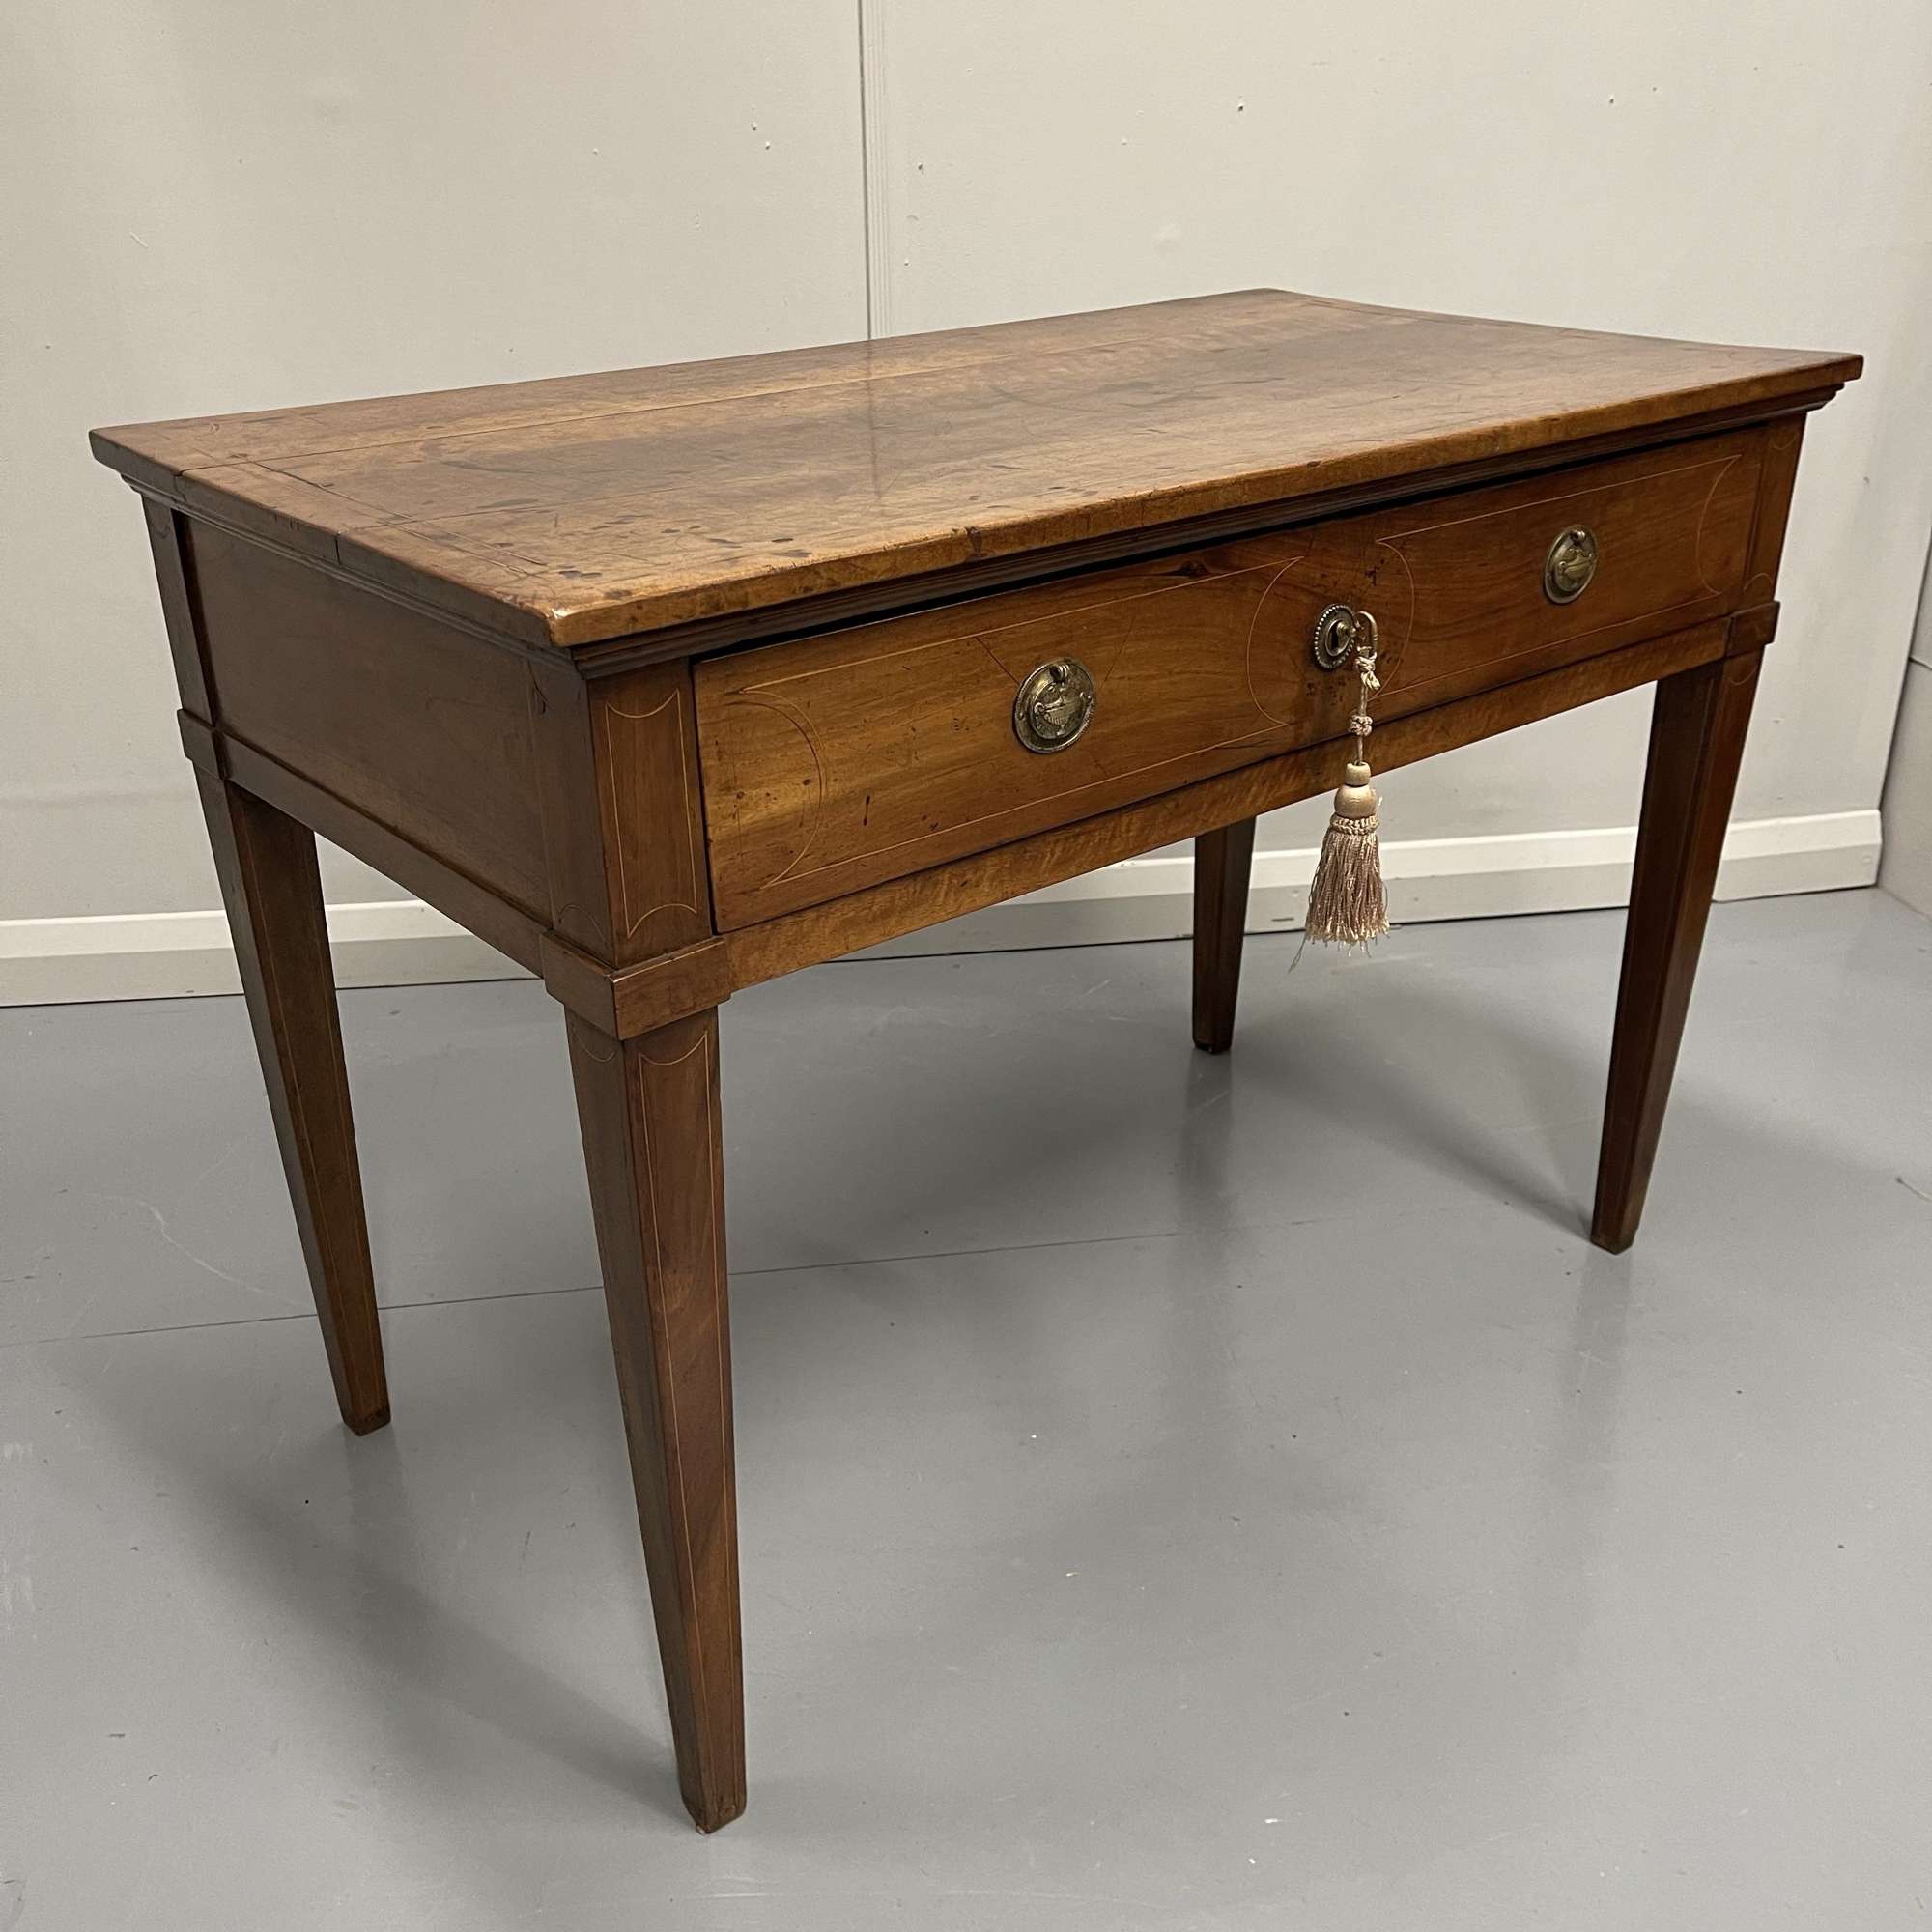 French Provincial Empire Inlaid Fruitwood Desk